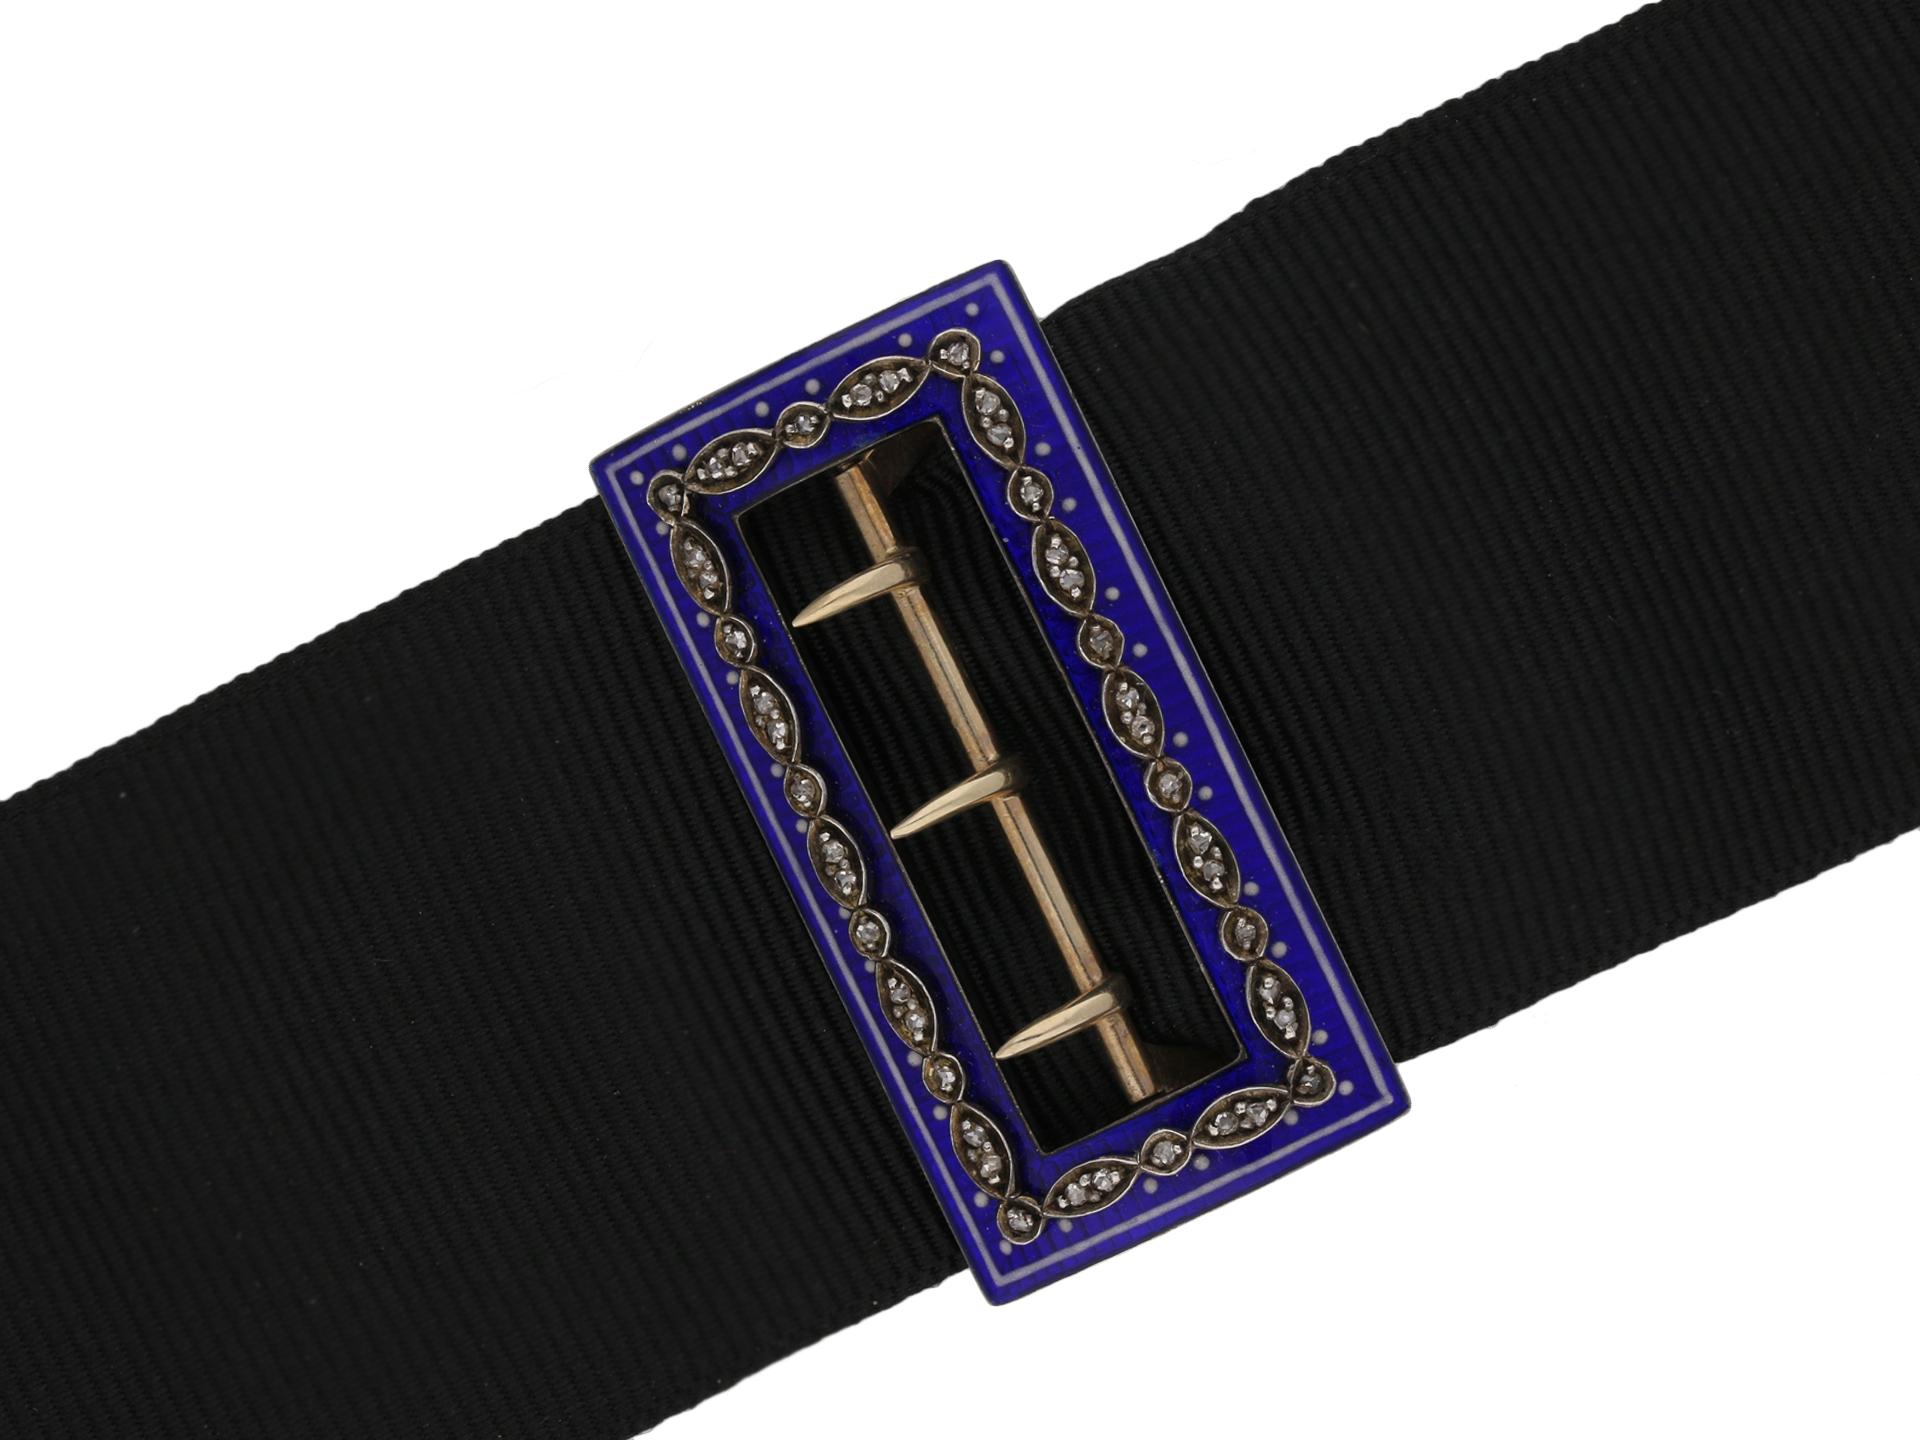 Victorian diamond and enamel sash buckle. Vibrant blue baisse taille enamelled border set with forty two rose cut diamonds in closed back grain settings with an approximate combined weight of 0.42 carats, to a rectangular sash buckle design